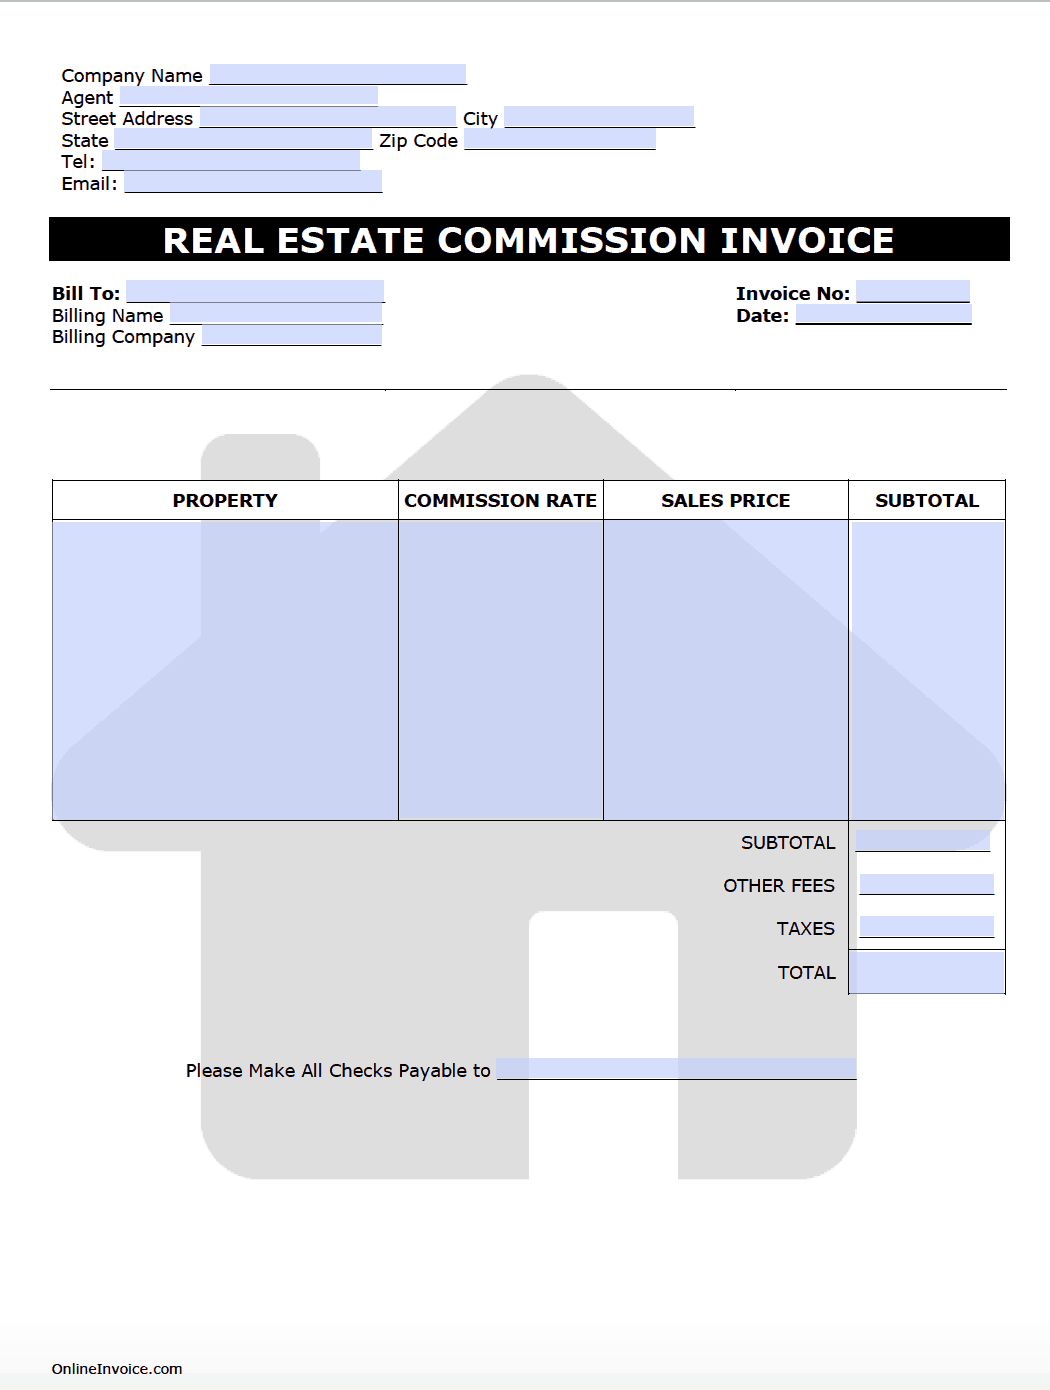 11 Format Invoice Format For Real Estate For Free By Invoice Format For Real Estate Cards Design Templates